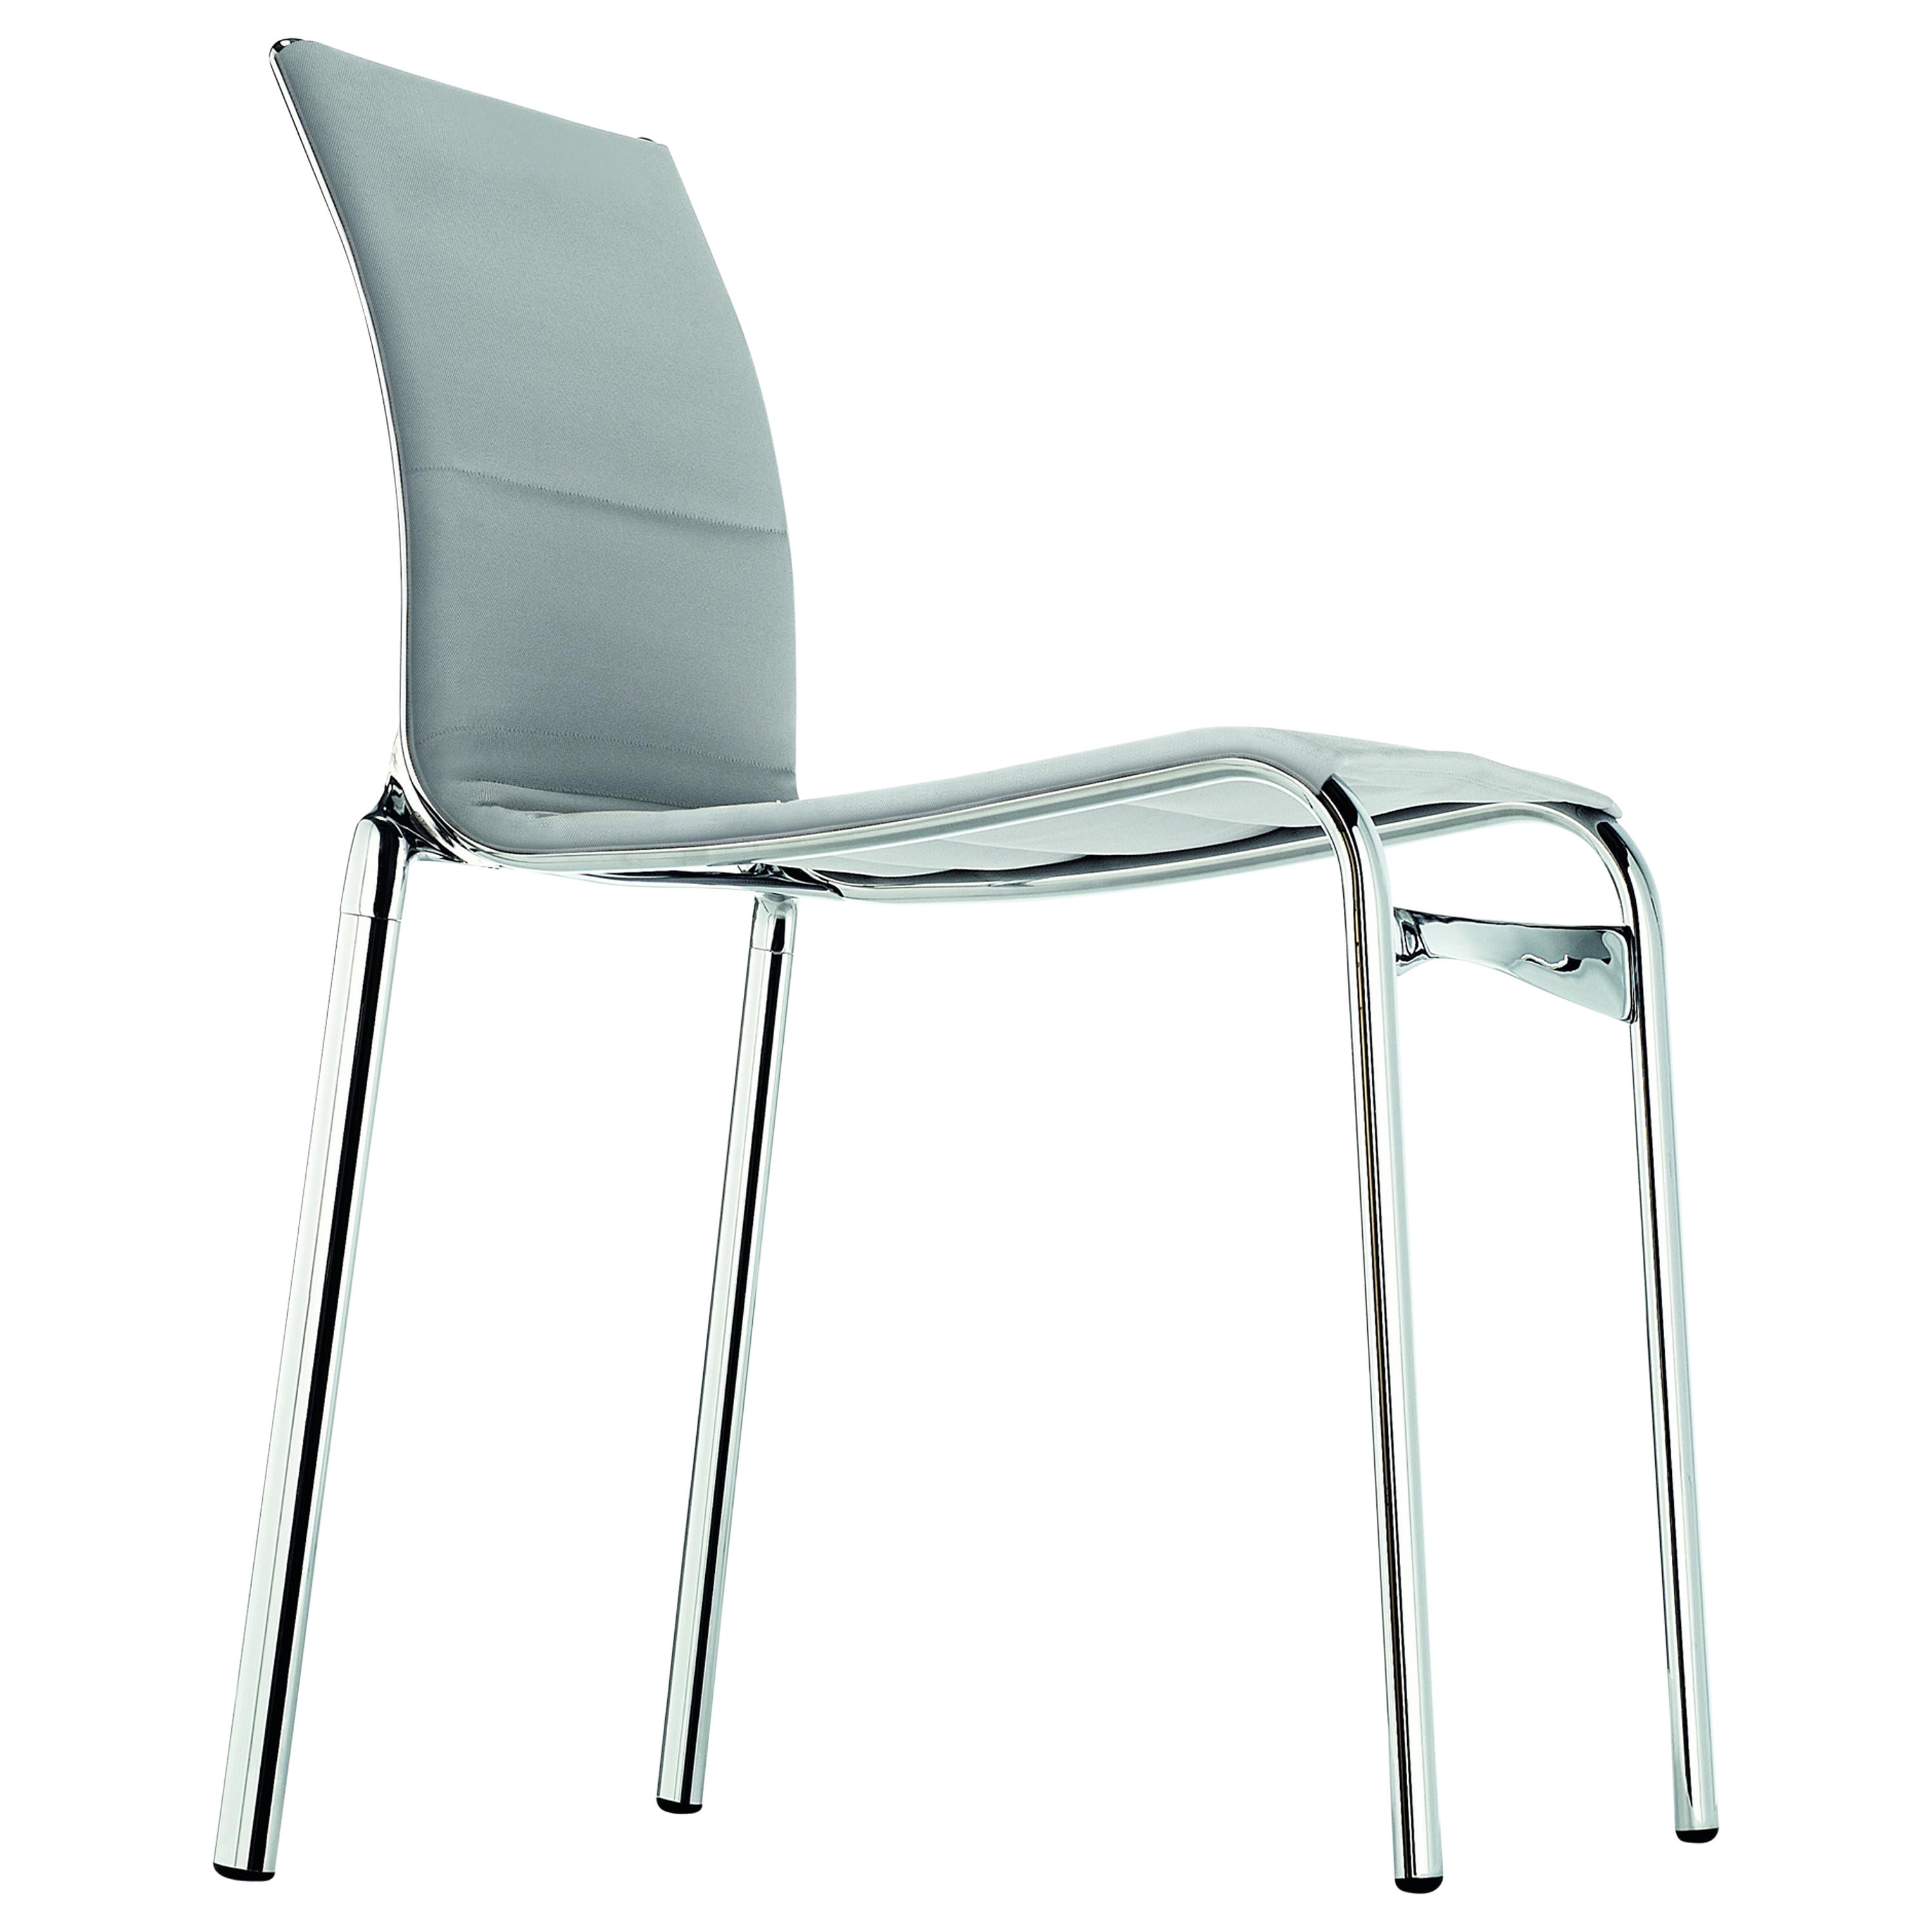 Alias Bigframe 44 Chair in Steelcut Trio Upholstery with Chromed Aluminium Frame For Sale